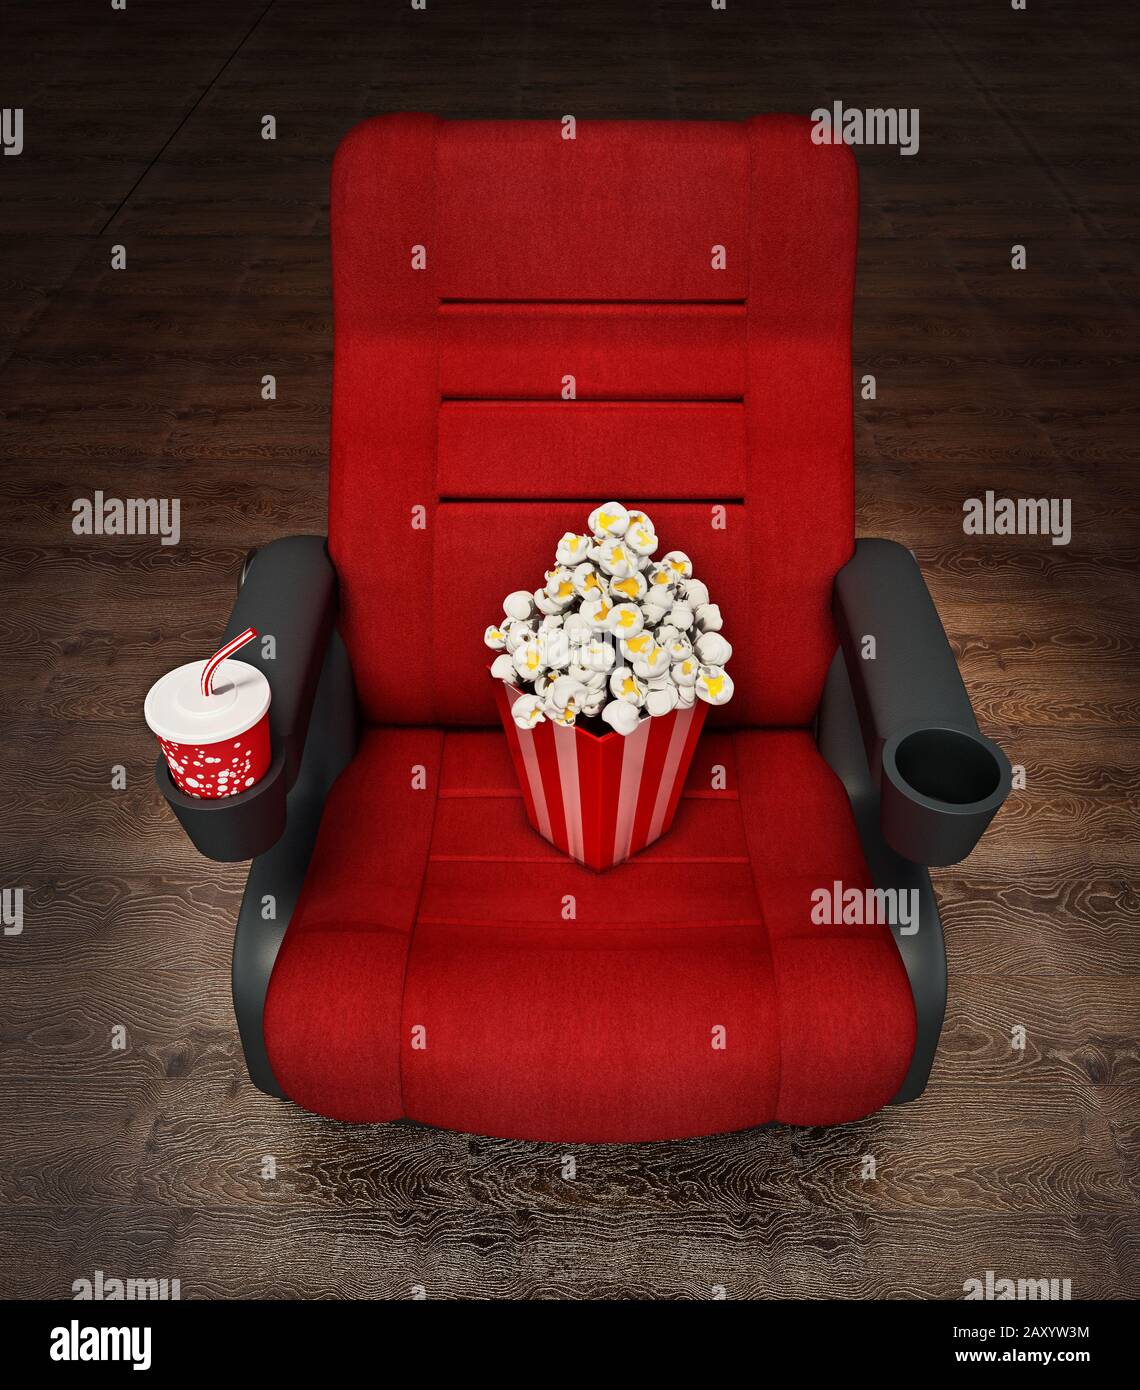 https://c8.alamy.com/comp/2AXYW3M/red-cinema-chair-with-popcorn-and-soda-3d-illustration-2AXYW3M.jpg